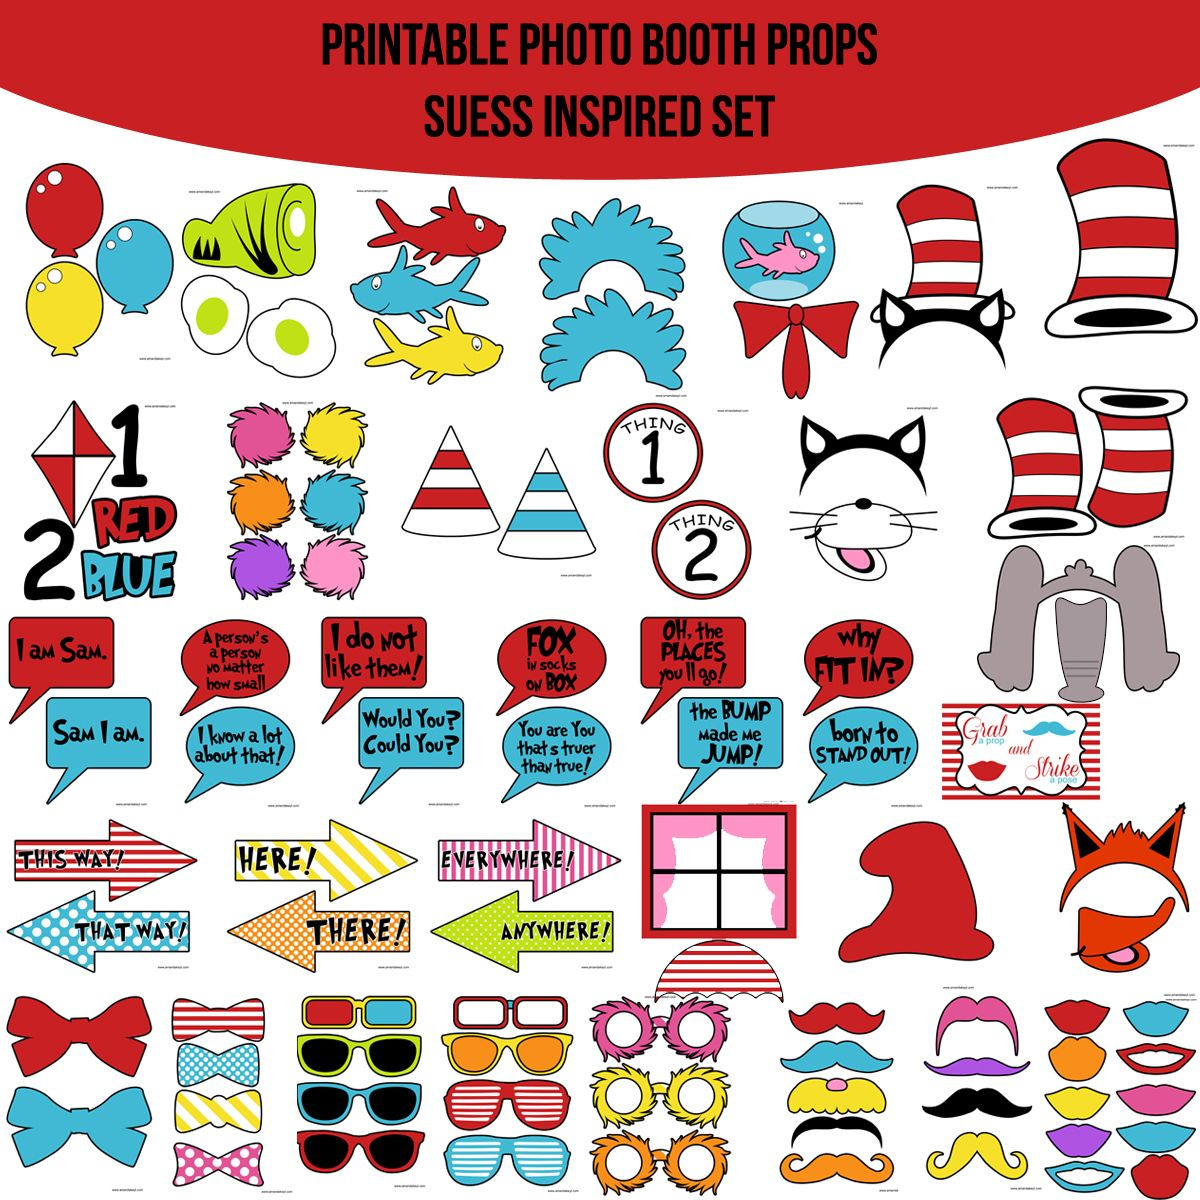 Instant Download Dr. Suess Inspired Printable Photo Booth Prop Set - Free Printable Dr Seuss Photo Props